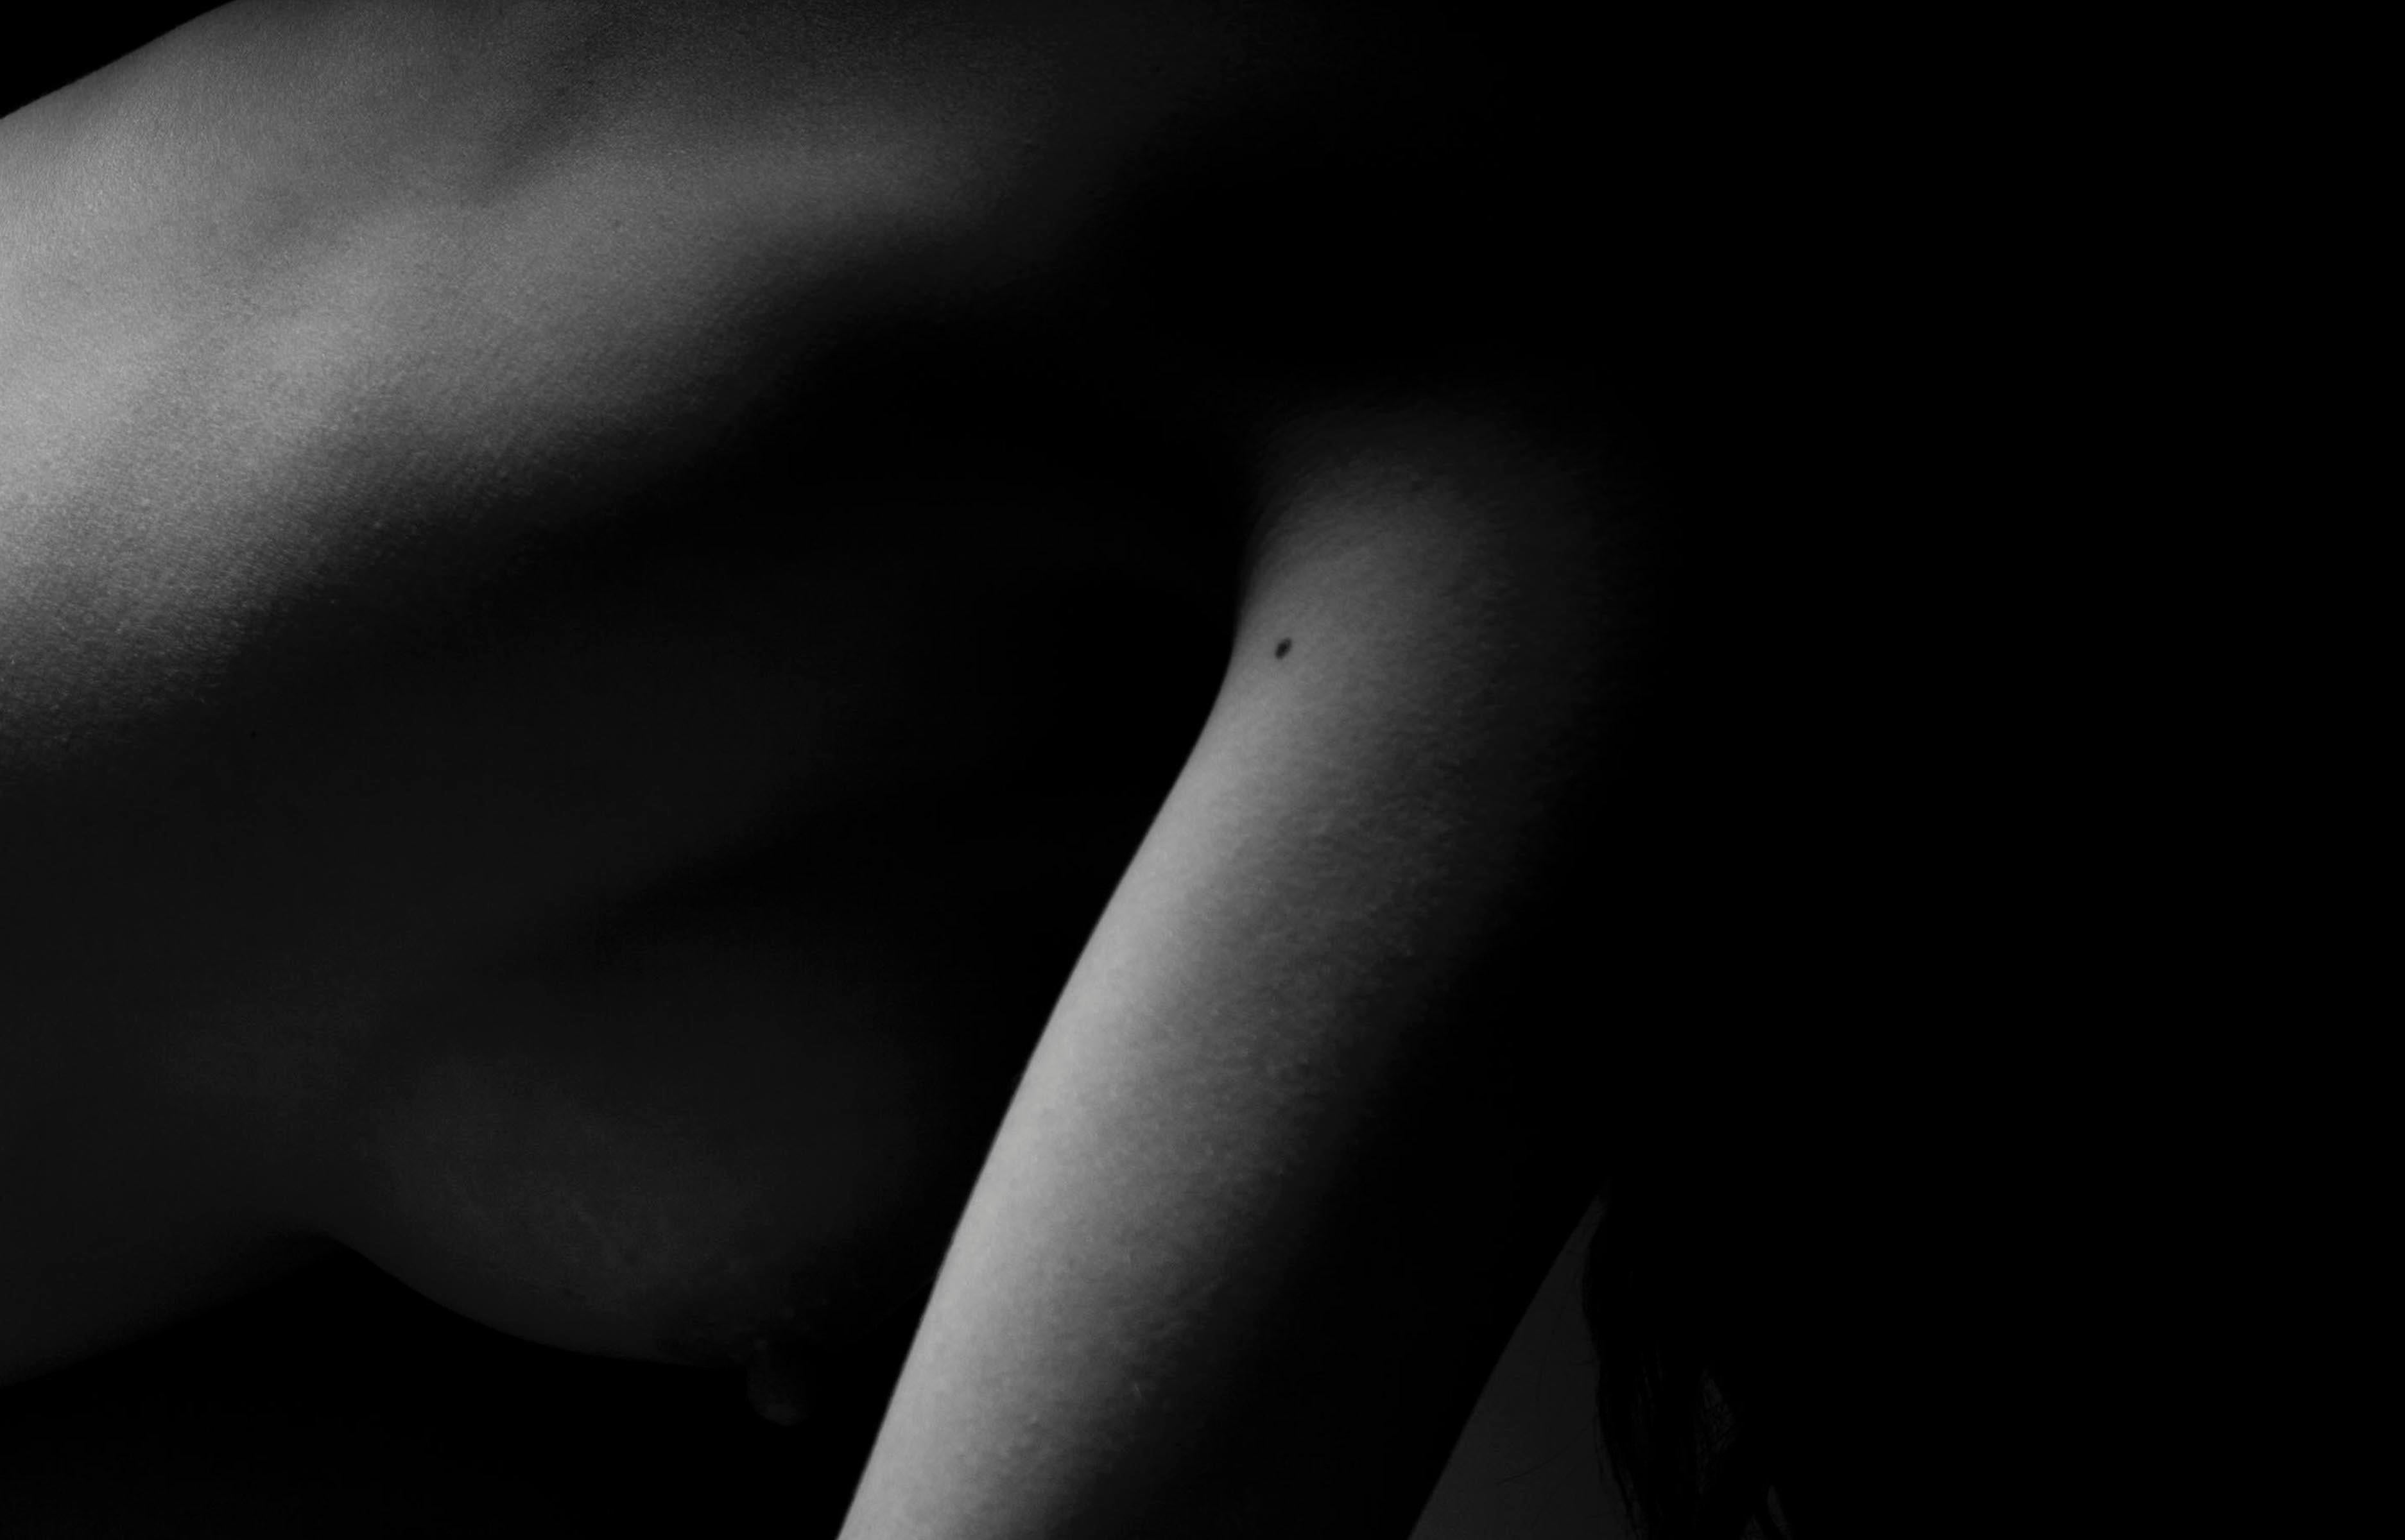 Untitled From the 'Serendipia' series, Black and White nude photograph - Photograph by Mauricio Velez